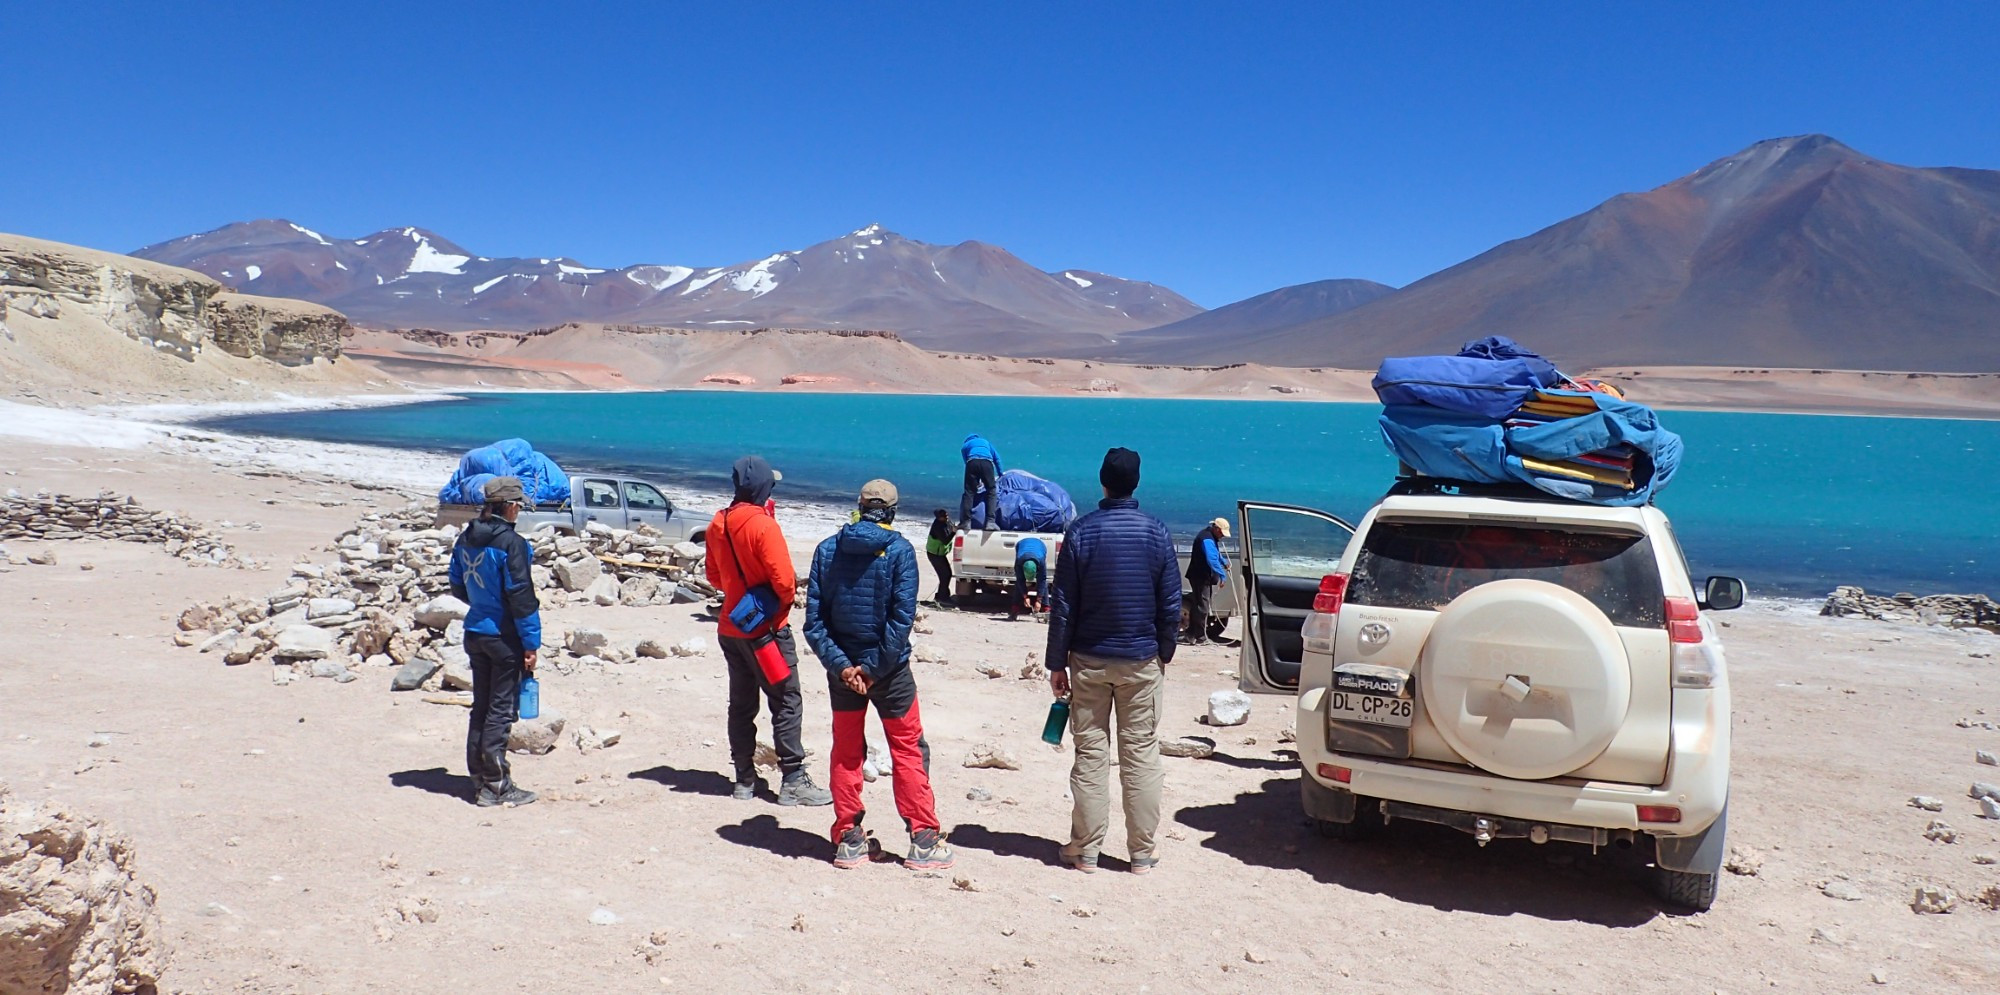 Mountaineering team setting up camp at Laguna Verde, elevation 14670 feet in the Atacama Desert of Northern Chile, surrounded by high peaks of the Chilean Andes.